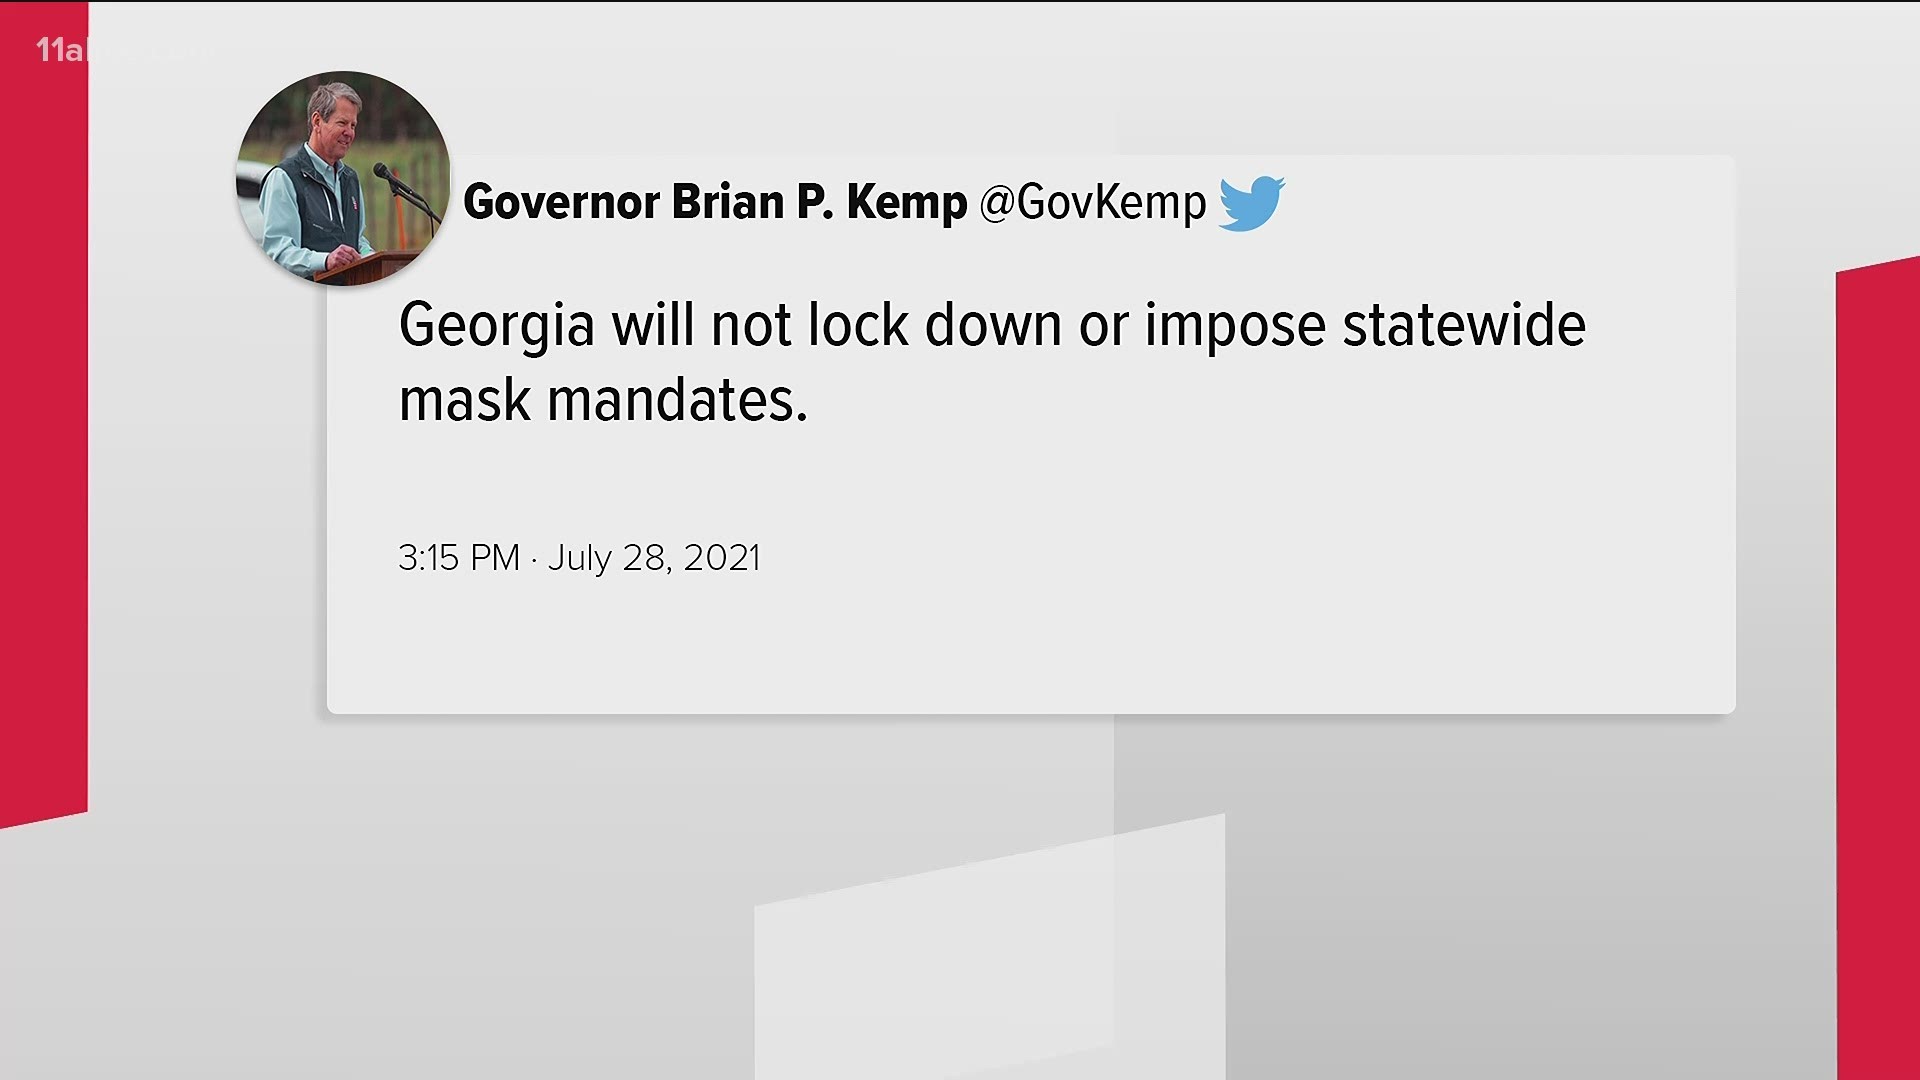 Georgia Gov. Brian Kemp made his stance clear, he has no intention of ordering a statewide mask mandate even through the CDC's guidance has shifted.